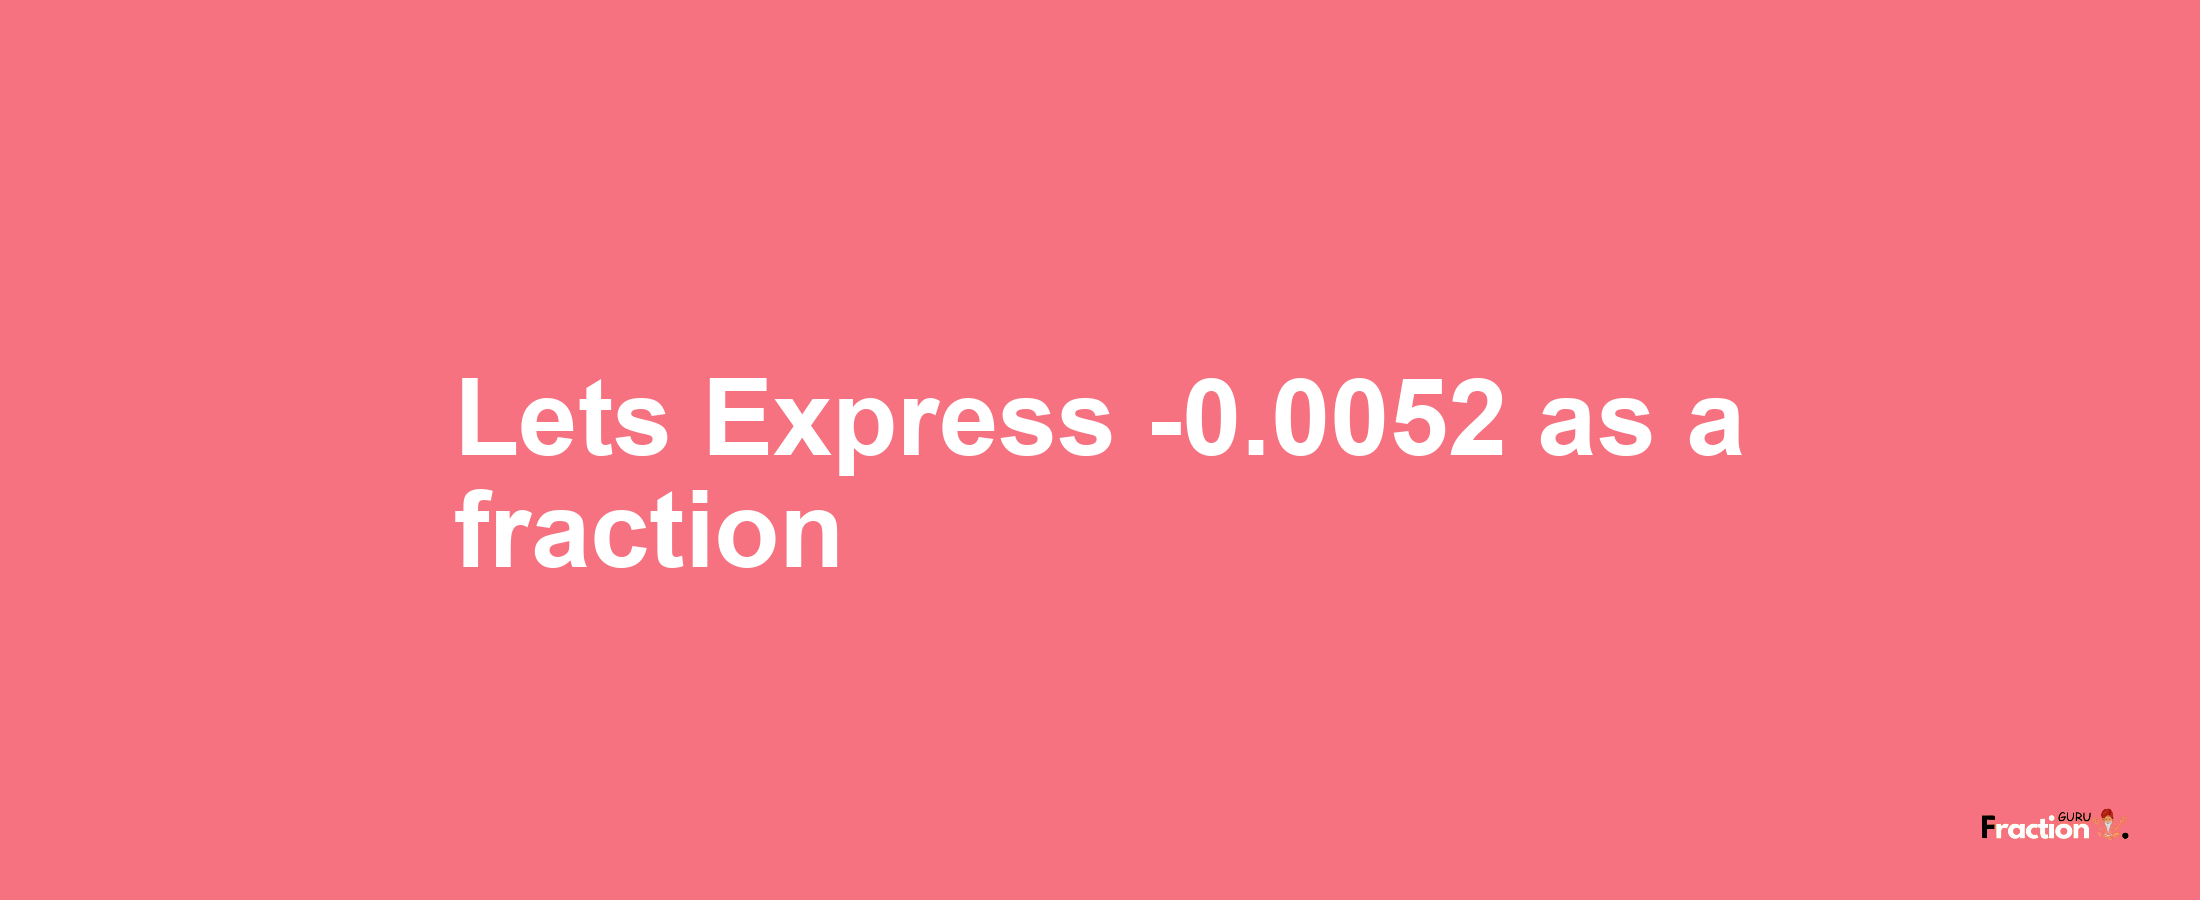 Lets Express -0.0052 as afraction